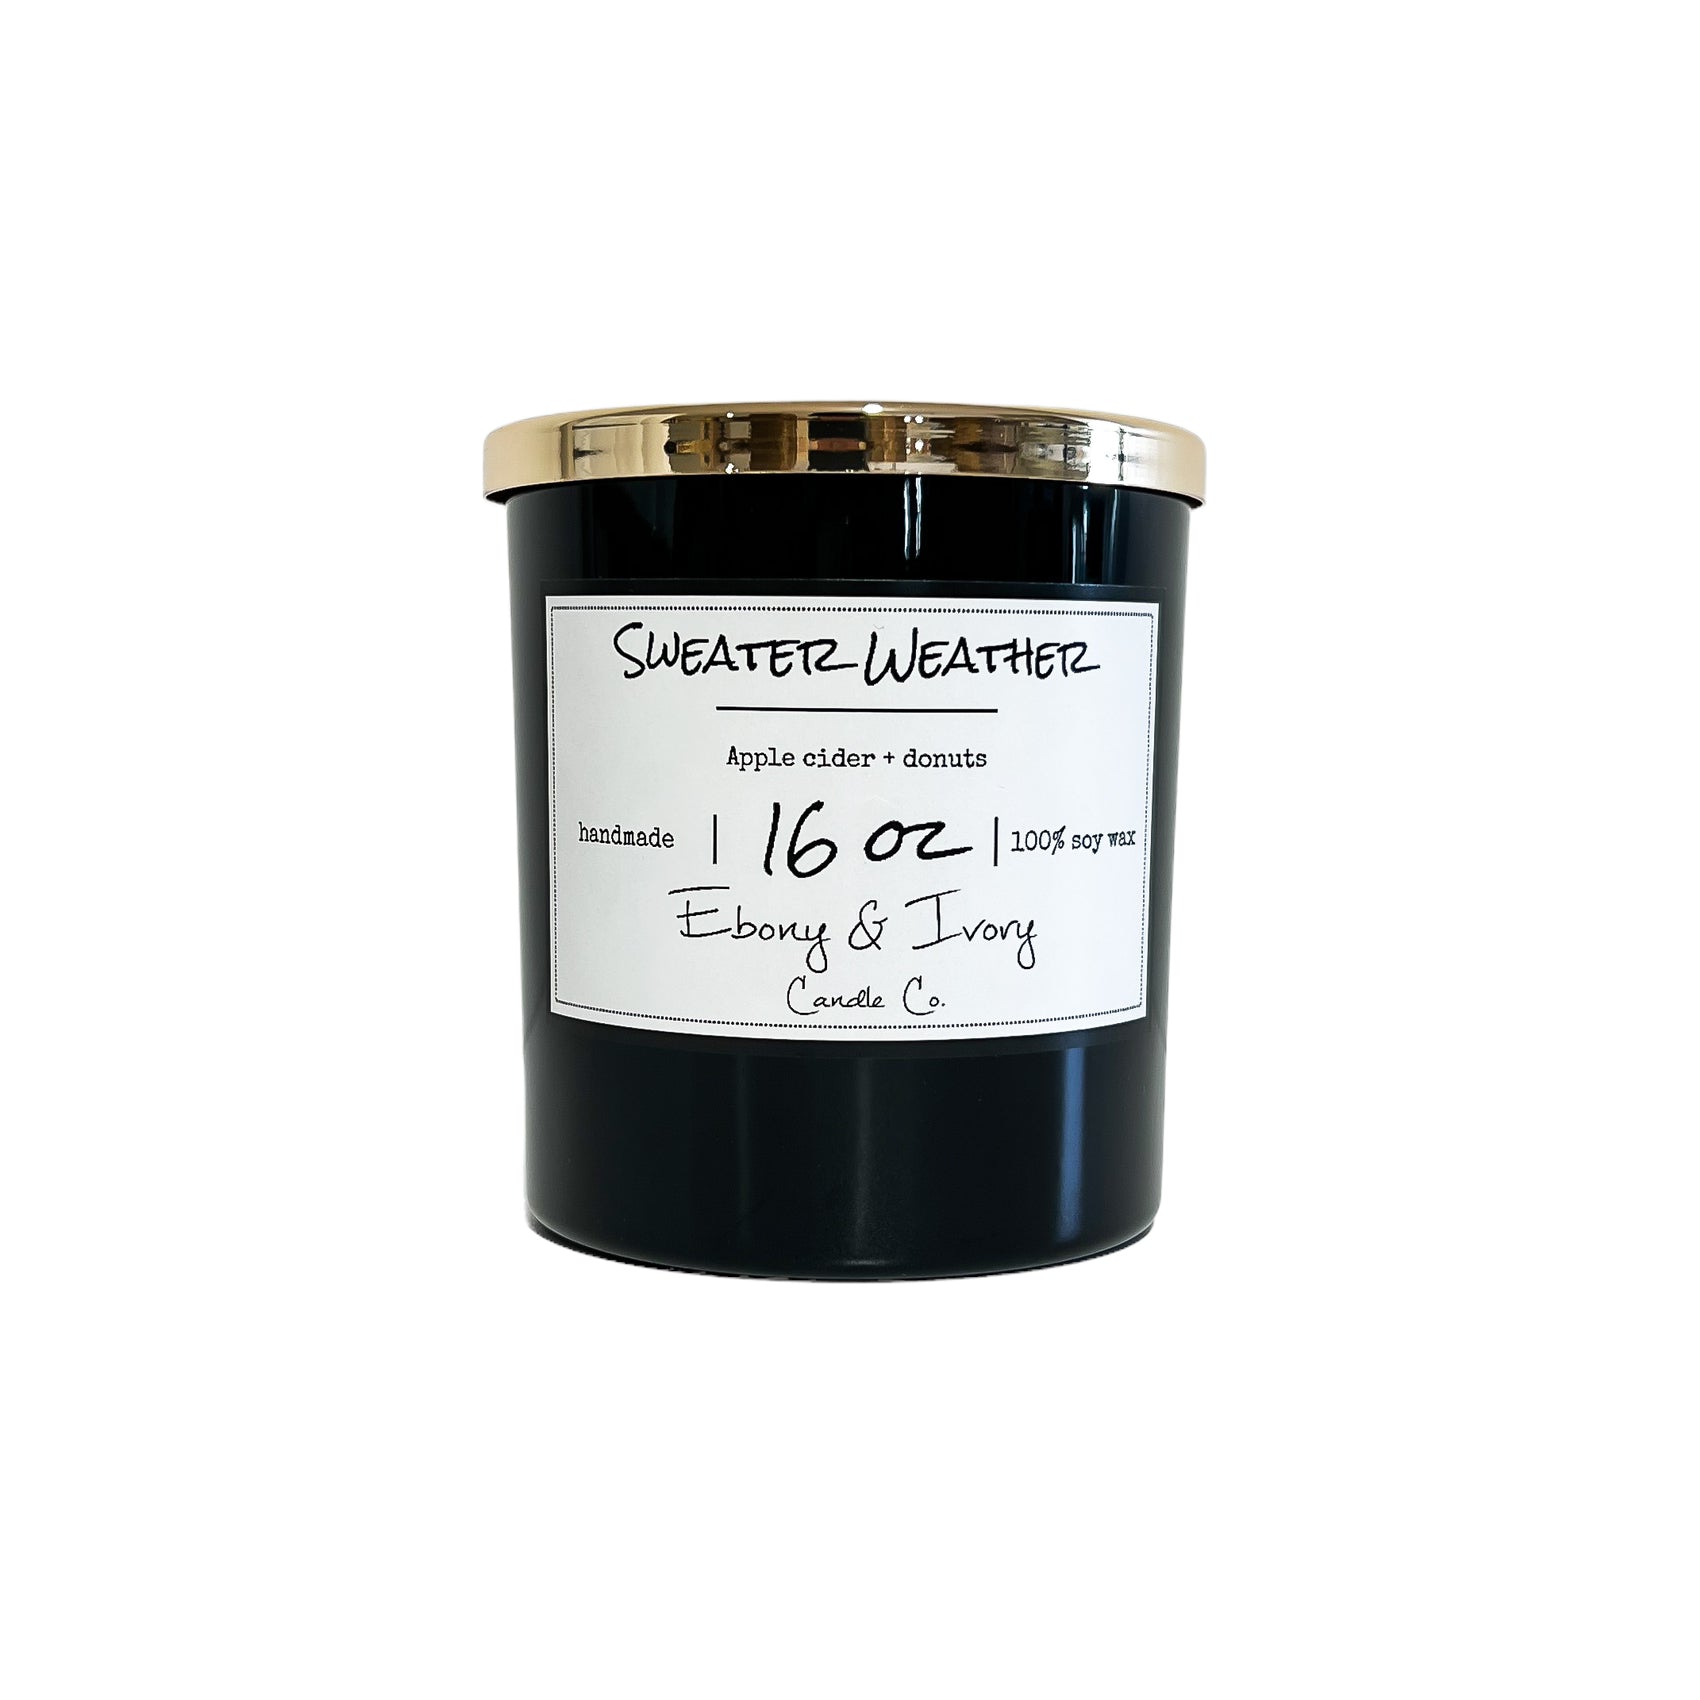 Black, sixteen ounce, apple cider and donuts scented soy wax candle with a white label that reads Sweater Weather